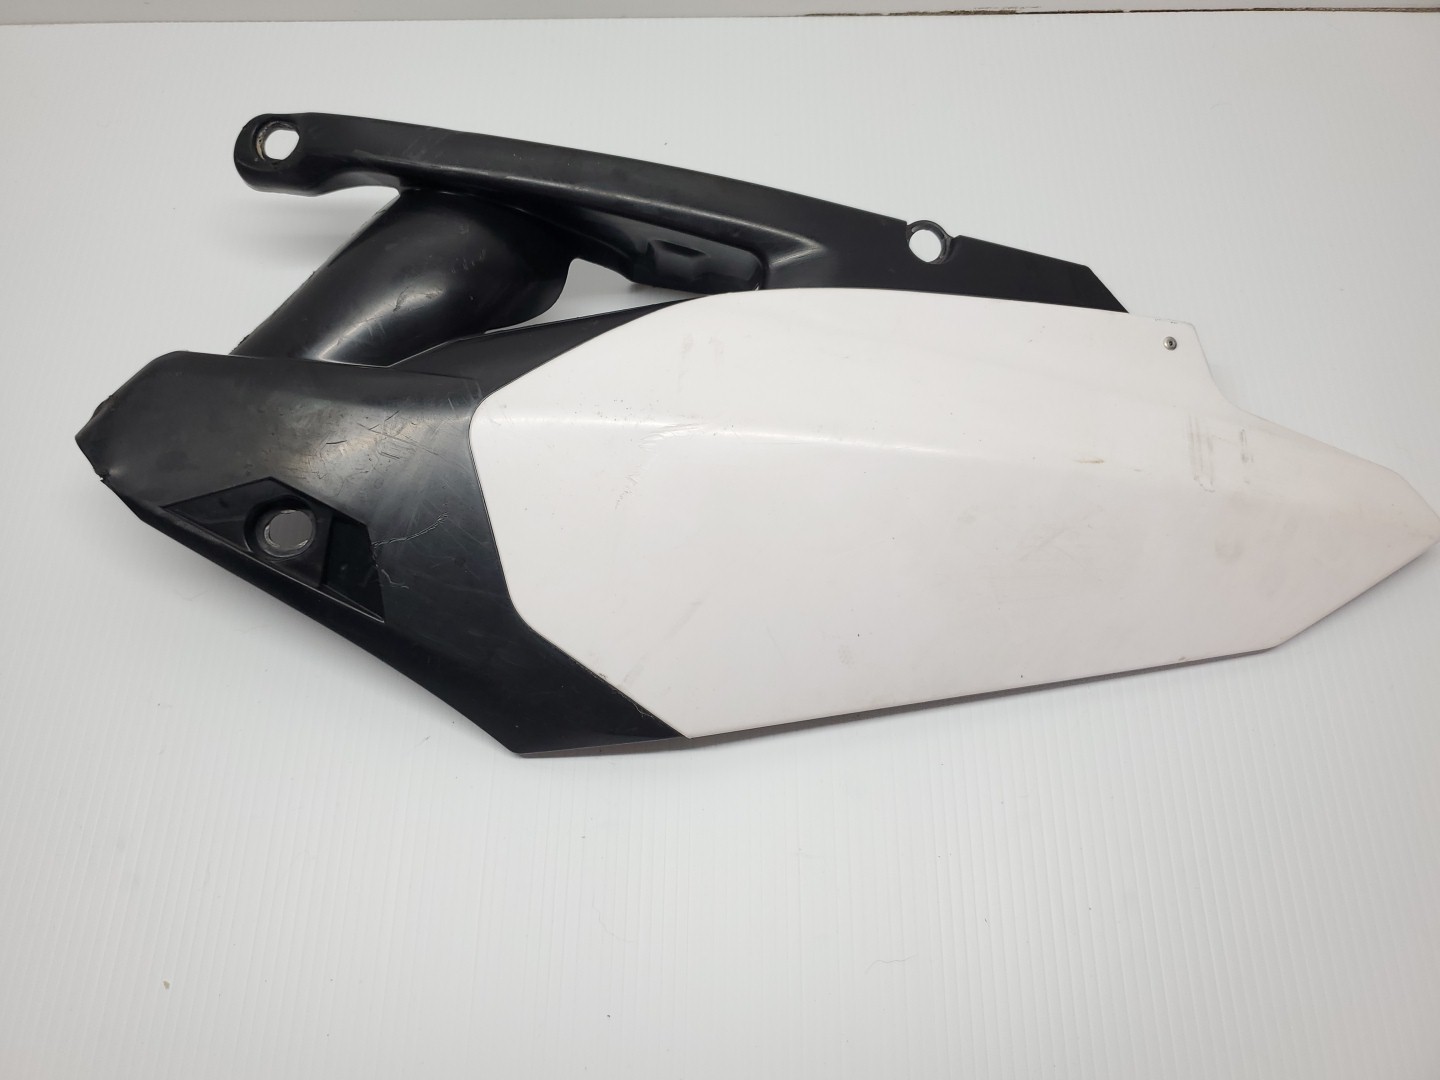 Aftermarket Left Side Cover 1 YZ450F 2010 YZ 450 F YZF Yamaha 10 #825